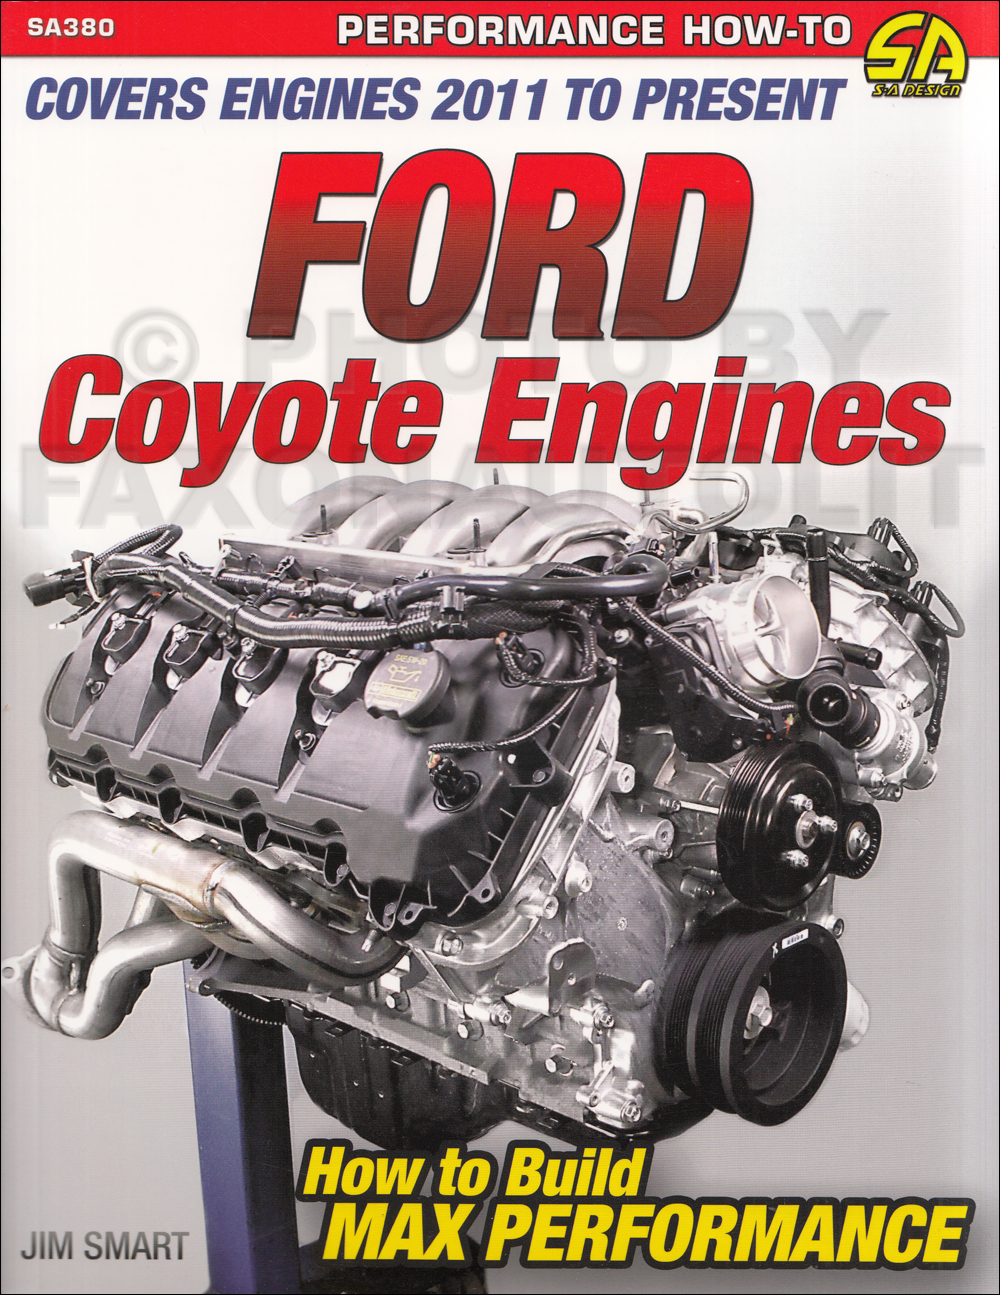 How to Build Max Performance Ford Coyote Engines 2011-2016 Mustang GT F-150